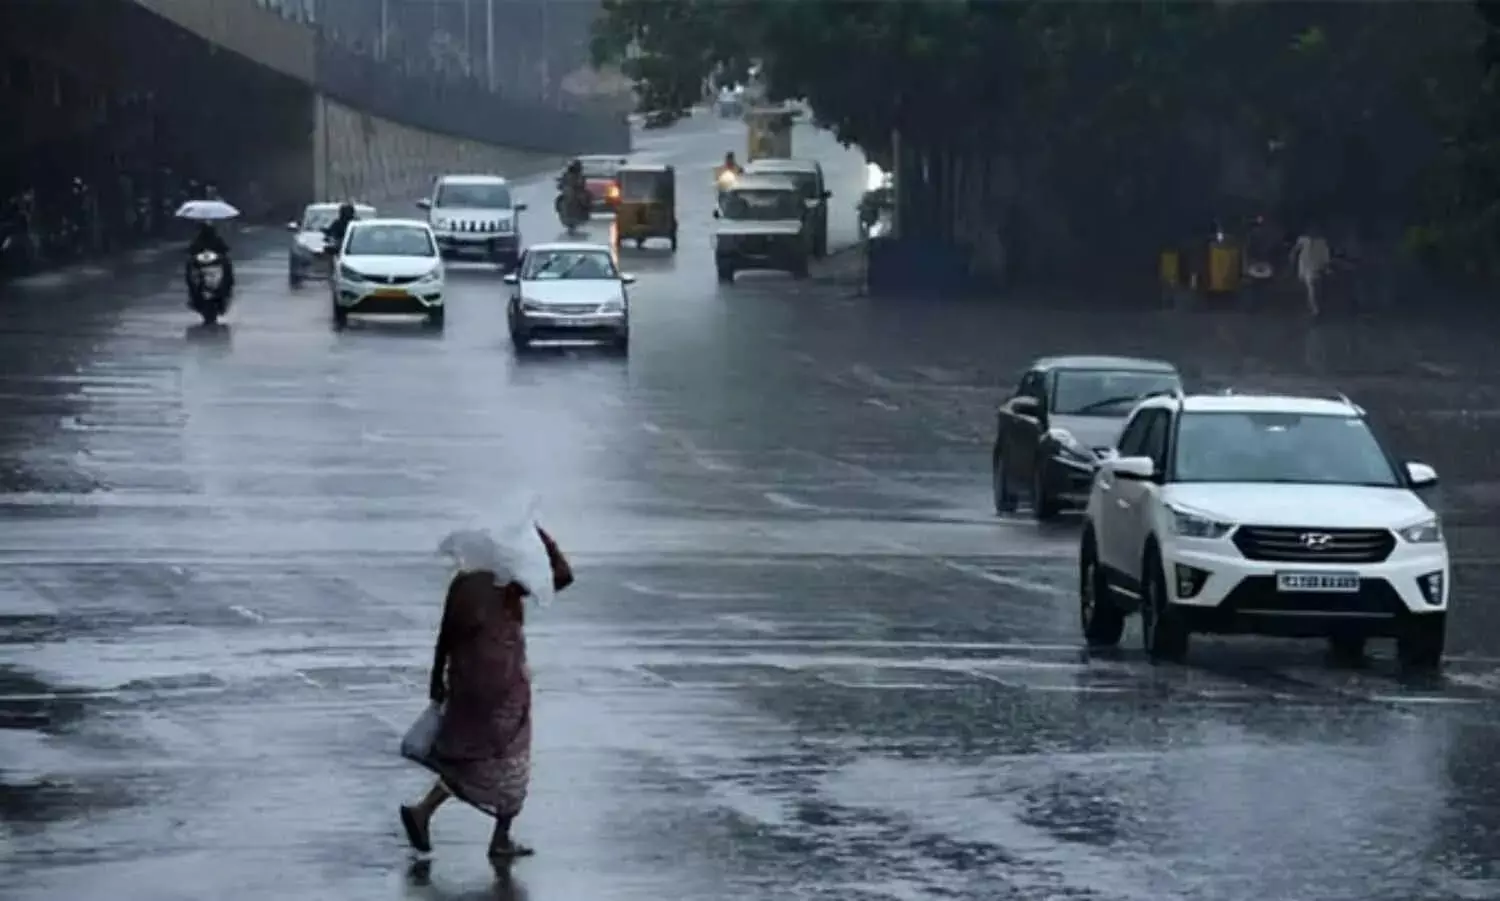 Heavy rains lash central Telangana, Hyderabad in early hours